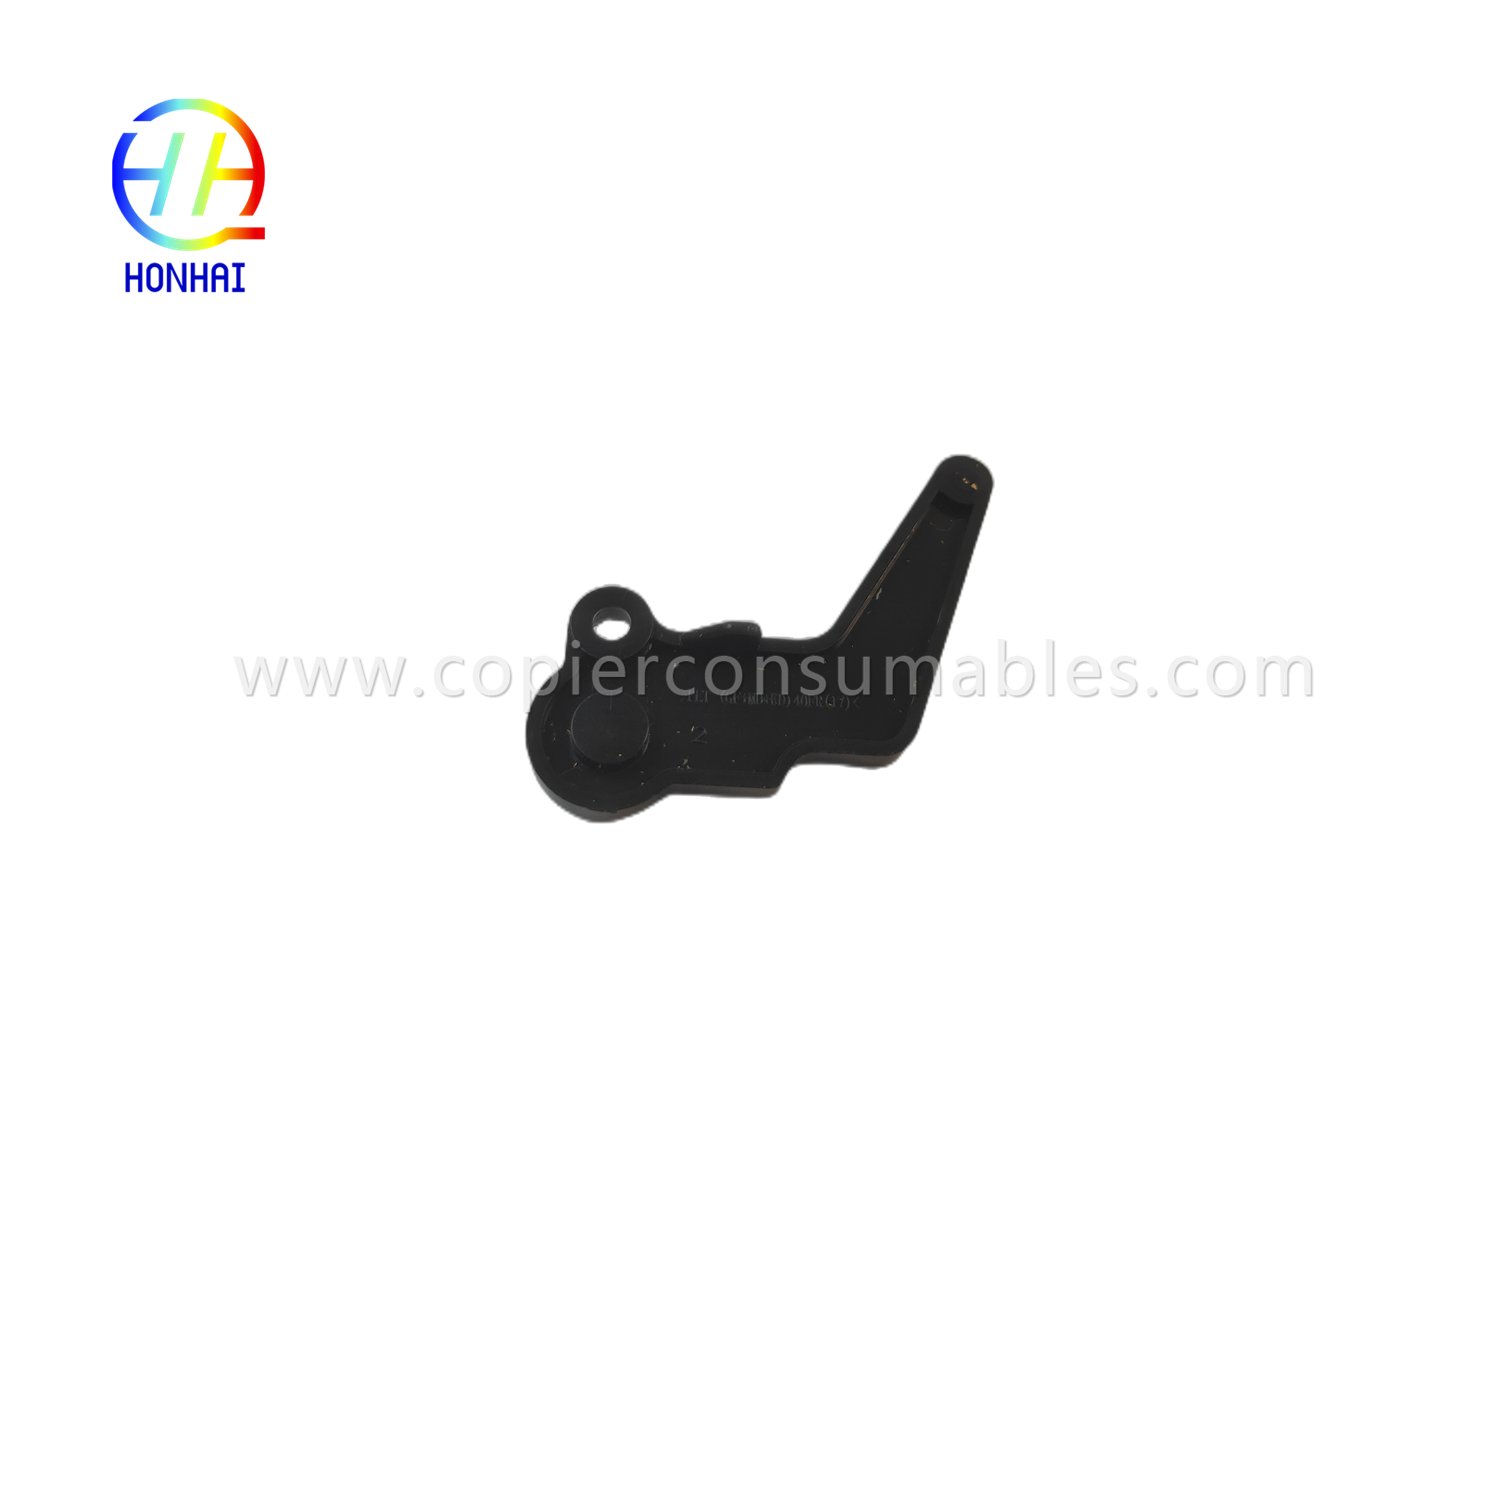 Fuser Rear Pressure Release Lever for Ricoh D019-4191  MP 2550BMP 2550SP MP 2851 MP 3350B MP 3350SP MP 3351SP  (3)